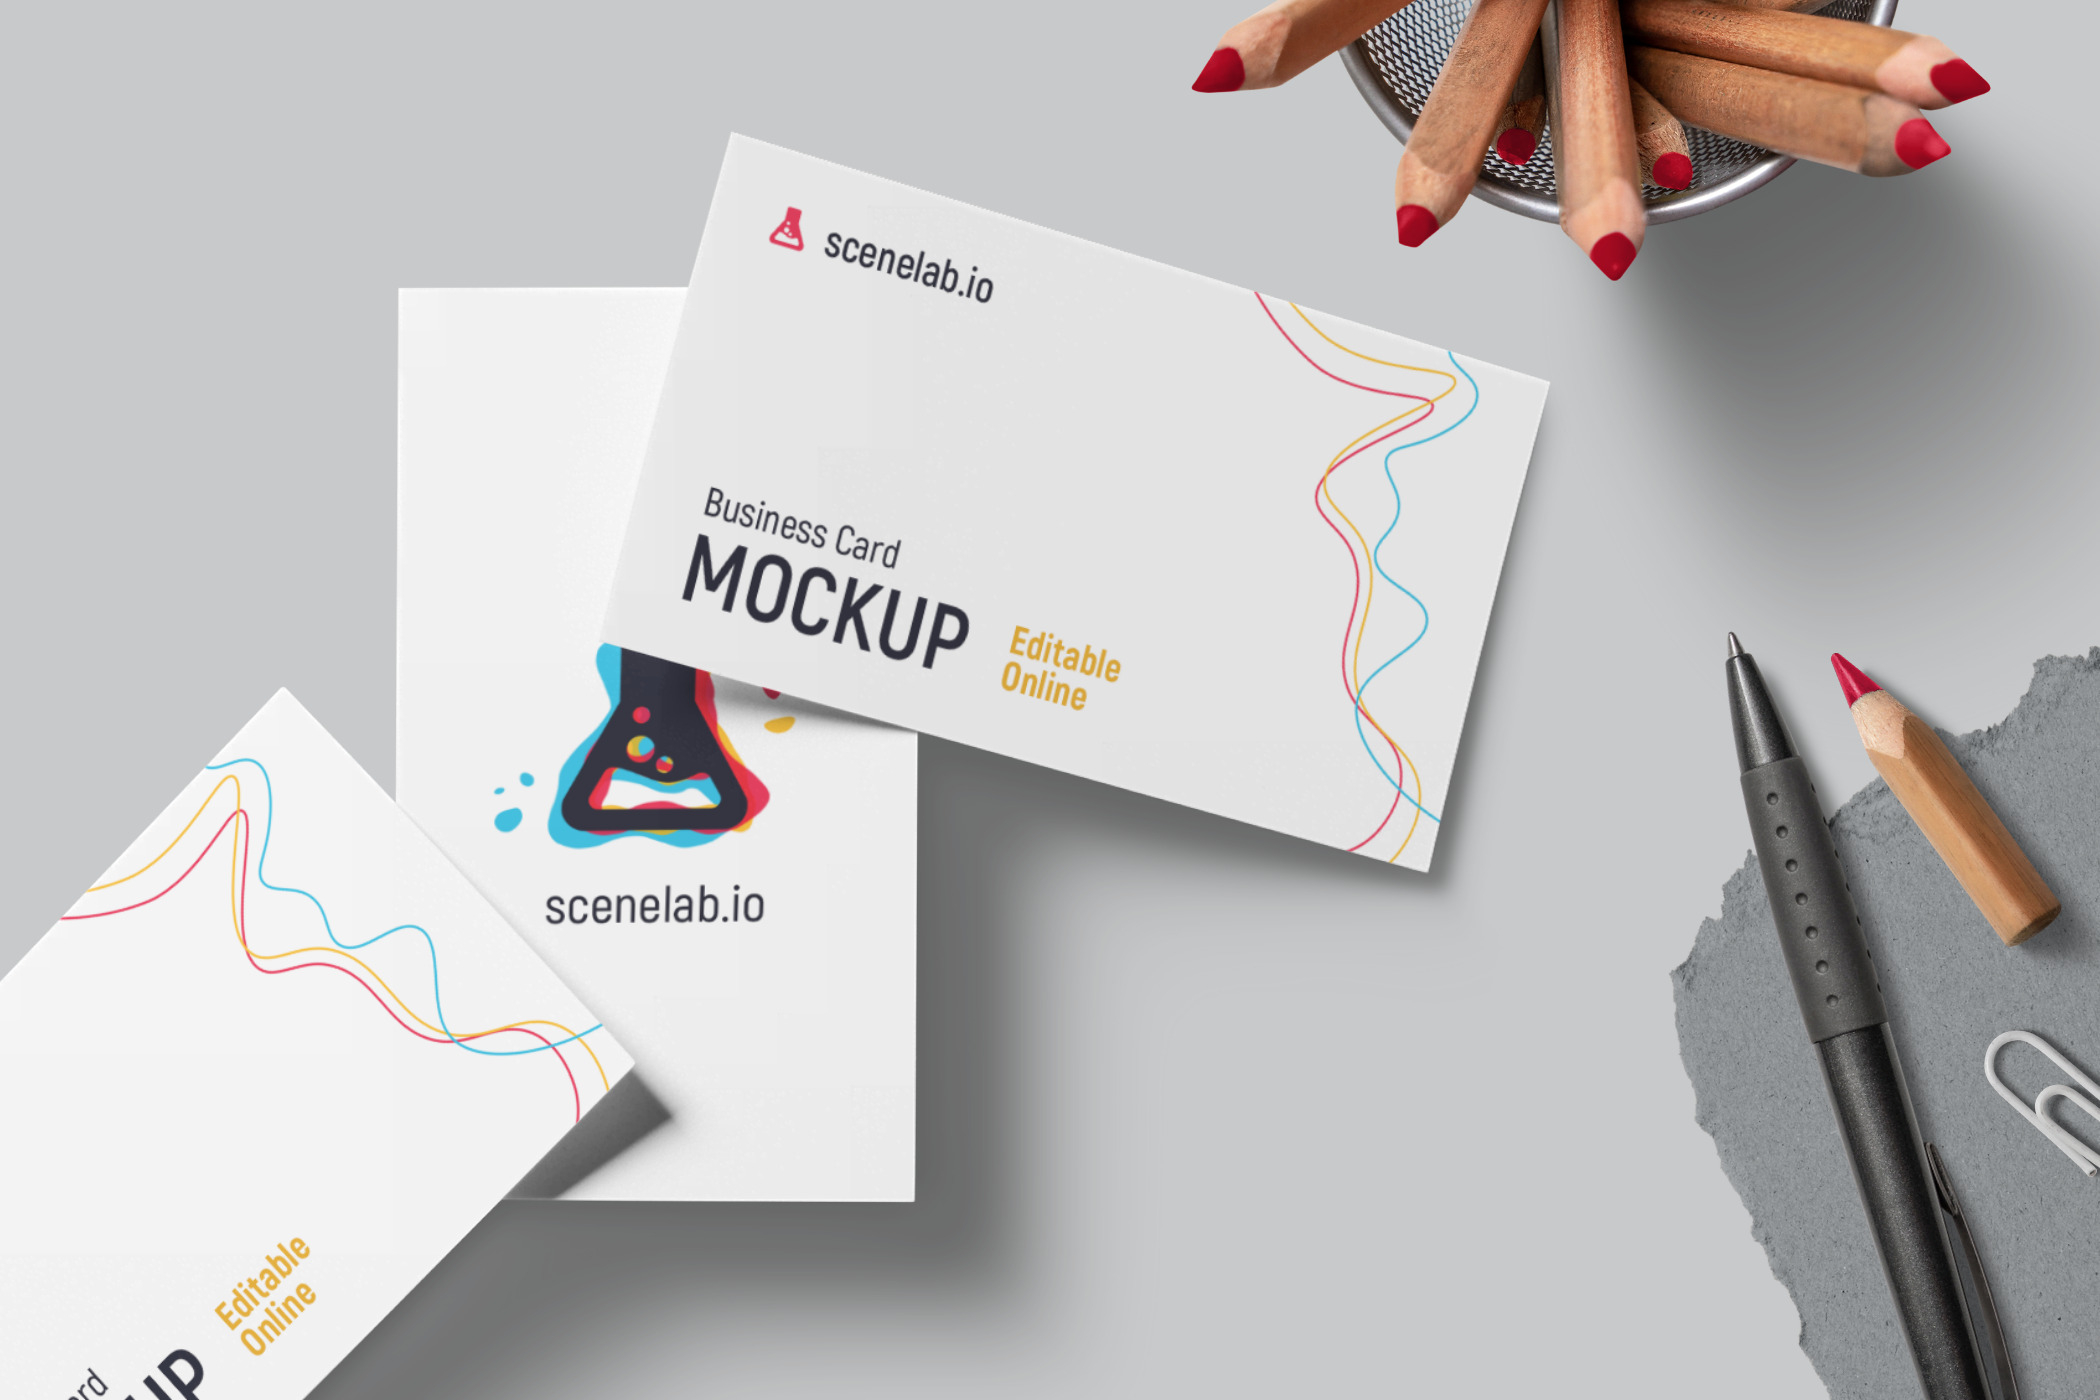 Download 5 Free Business Card Mockups Without Photoshop | SceneLab - Online mockups made easy